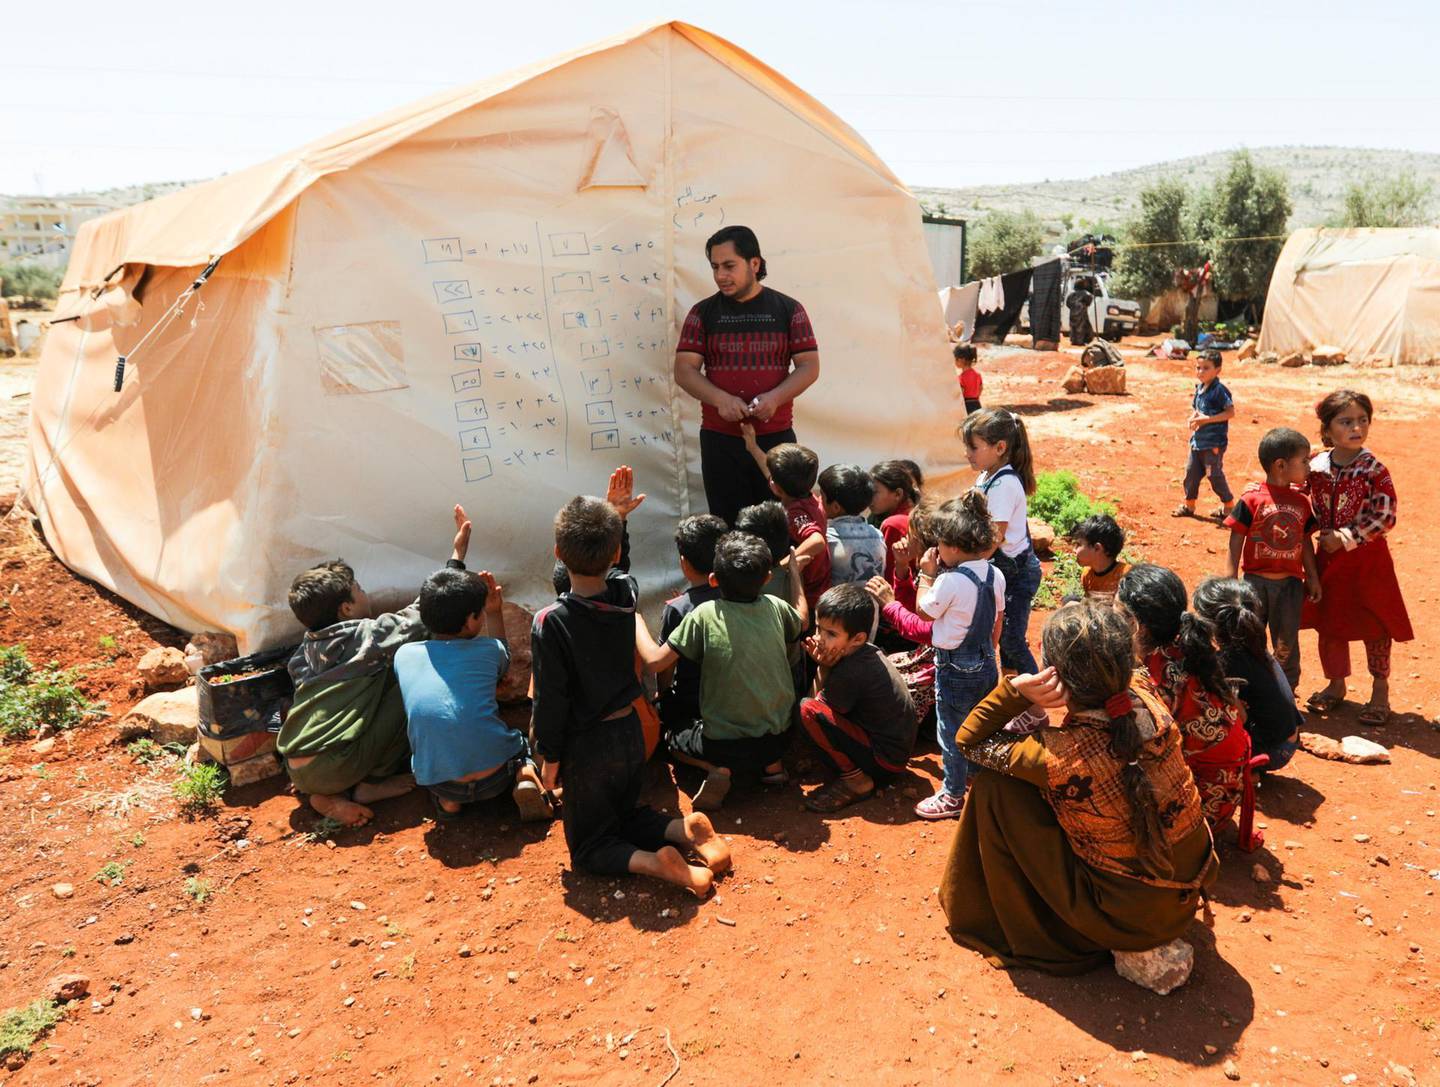 Children attend a class conducted by Muheeb al-Essa, 27, a teacher at a camp for internally displaced people in northern Idlib, Syria, June 10, 2021. Picture taken June 10, 2021. REUTERS/Khalil Ashawi